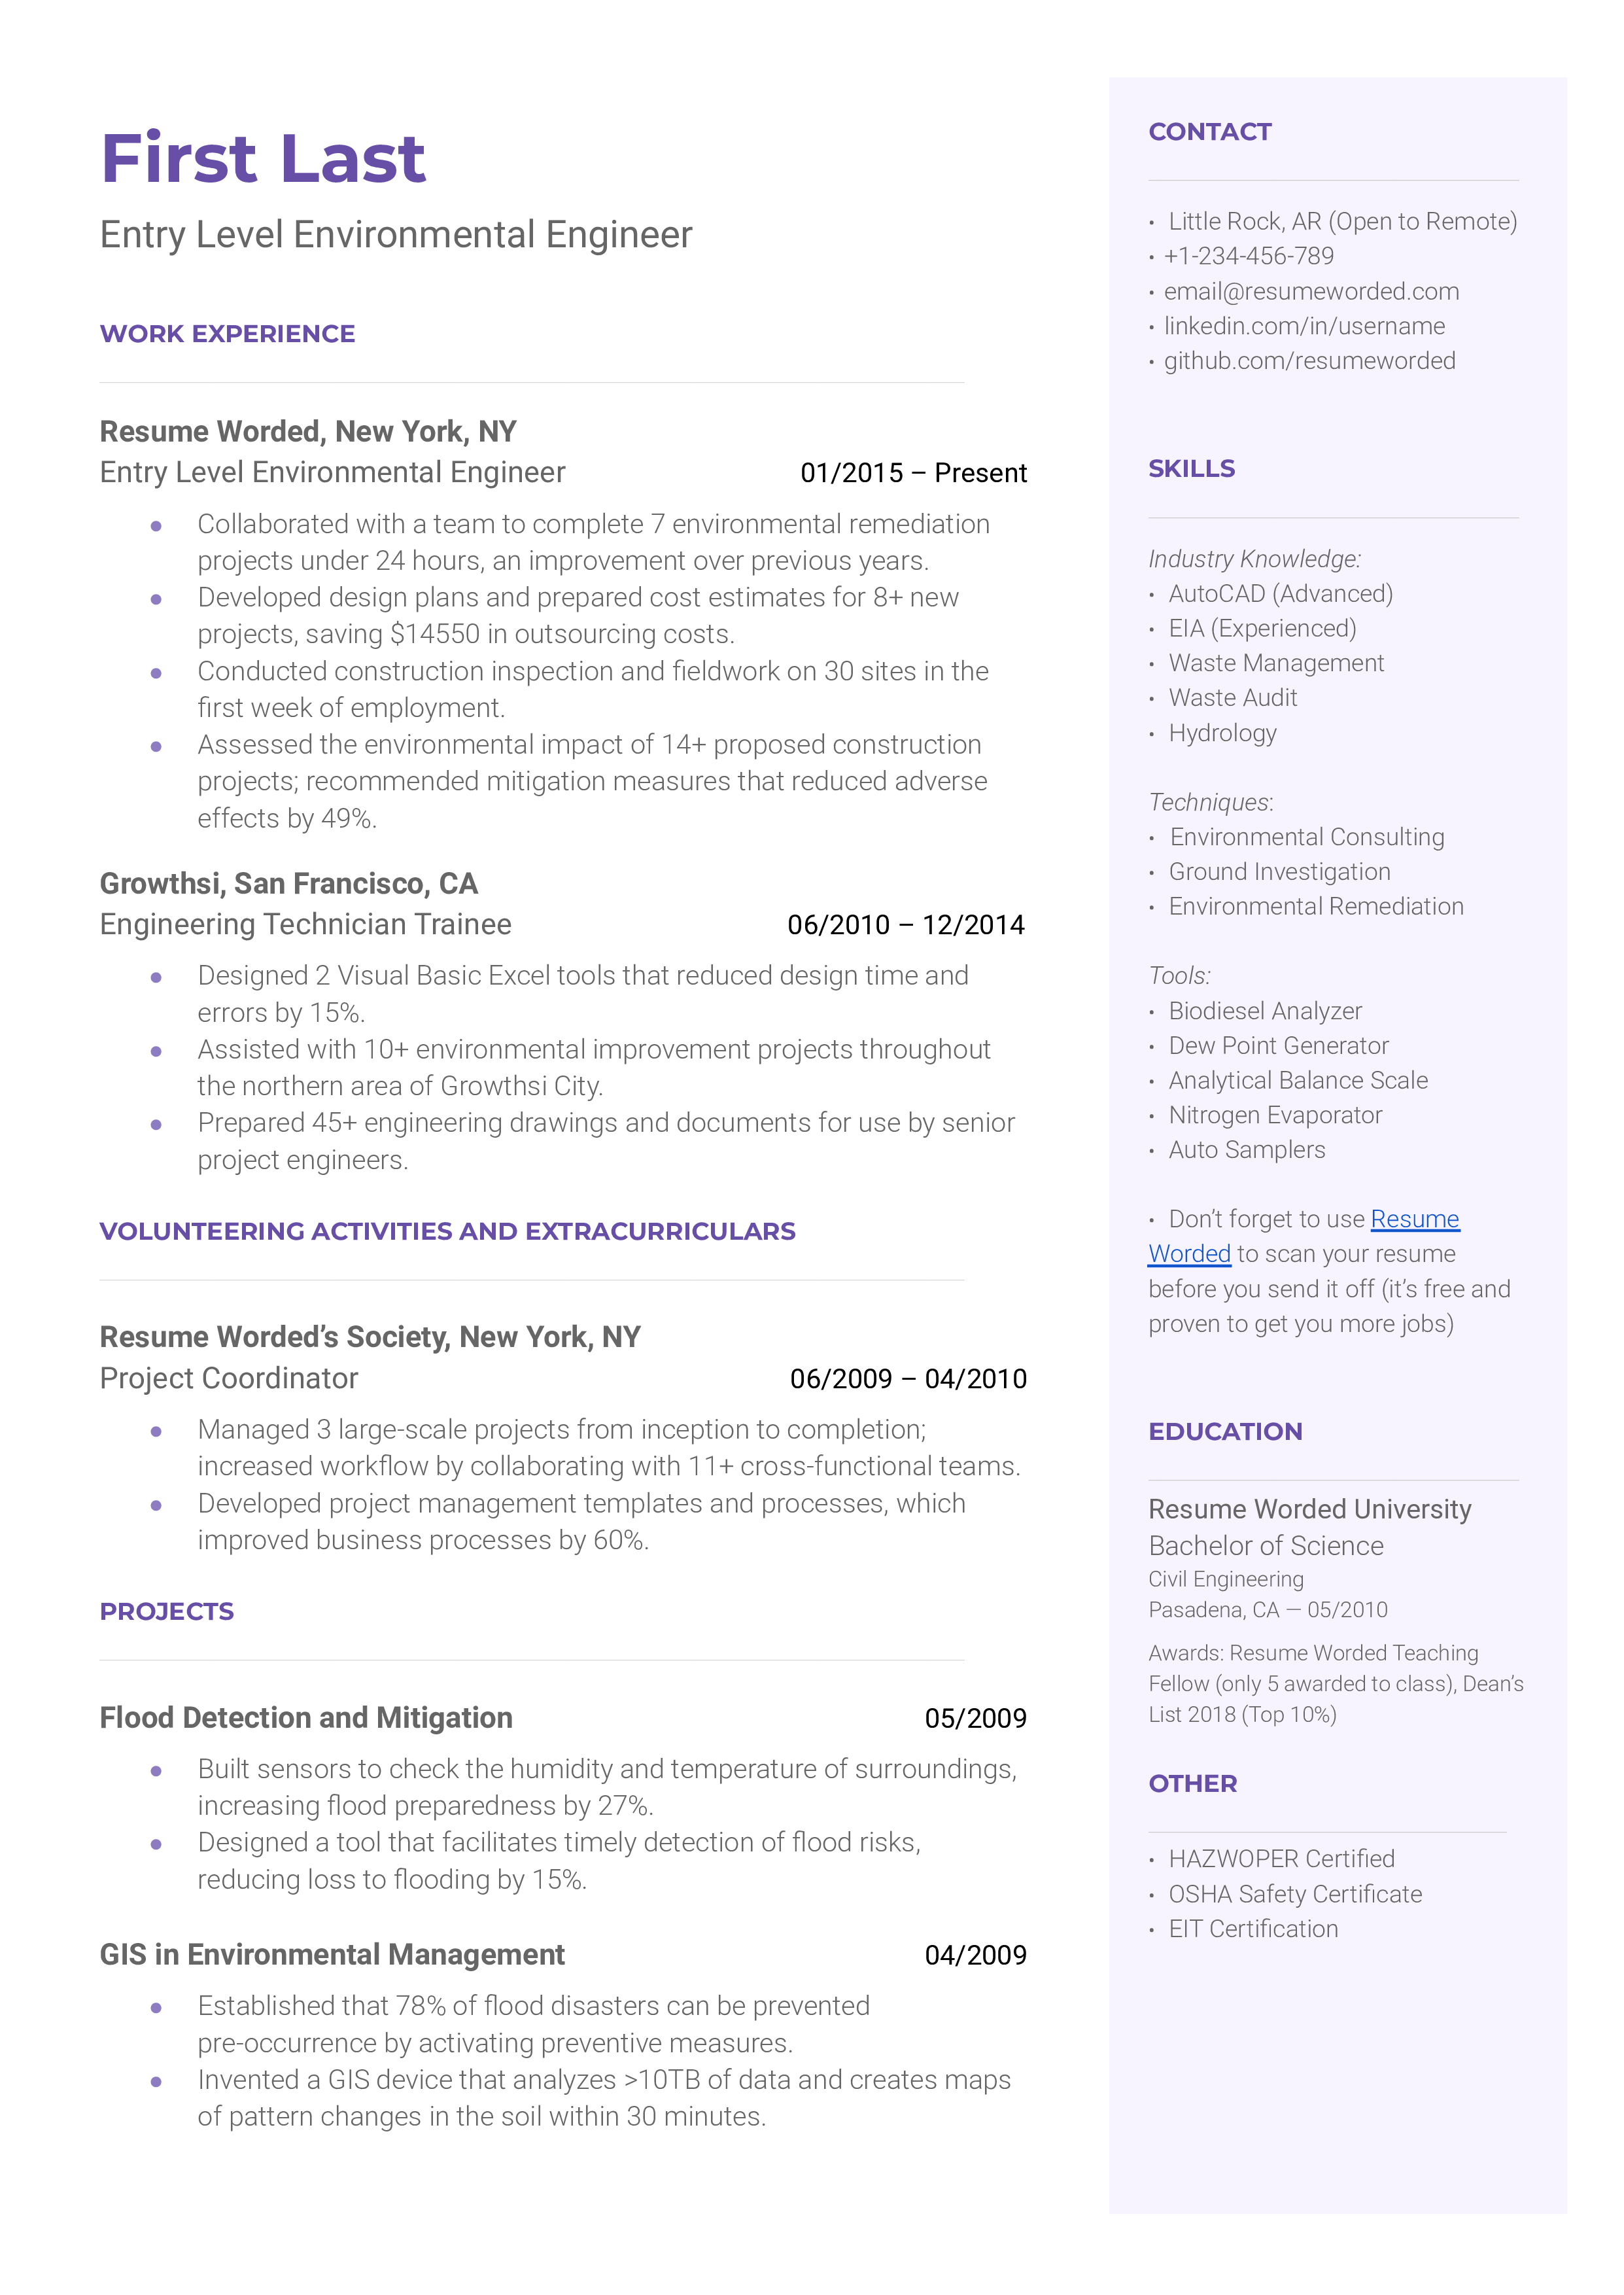 An entry-level environmental engineer resume template including volunteering experience.